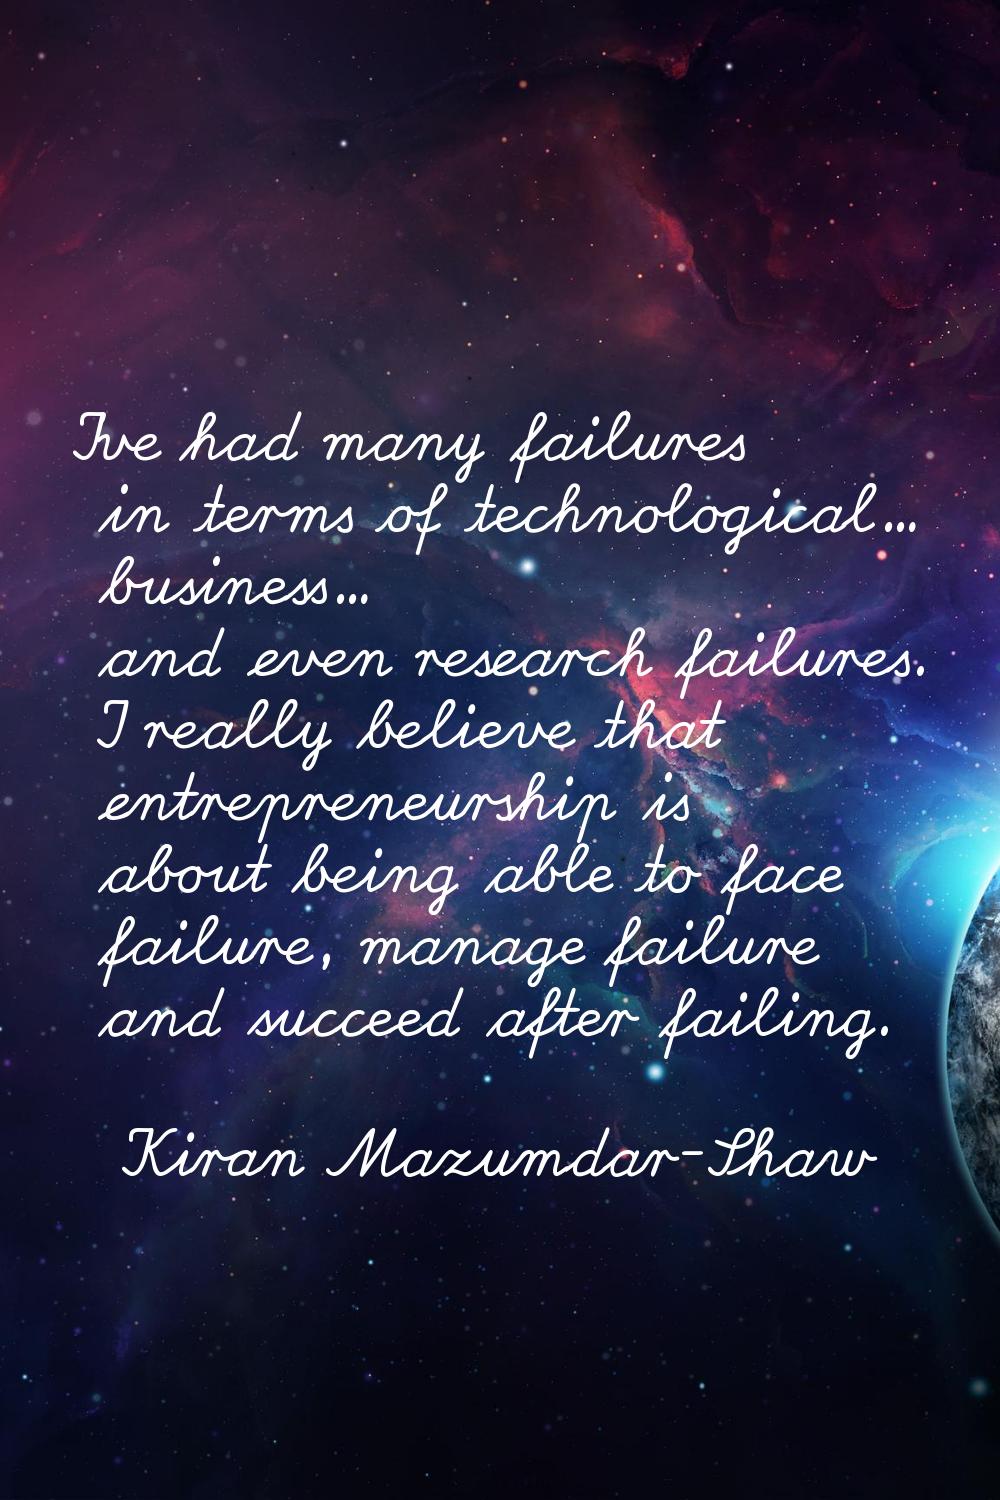 I've had many failures in terms of technological... business... and even research failures. I reall